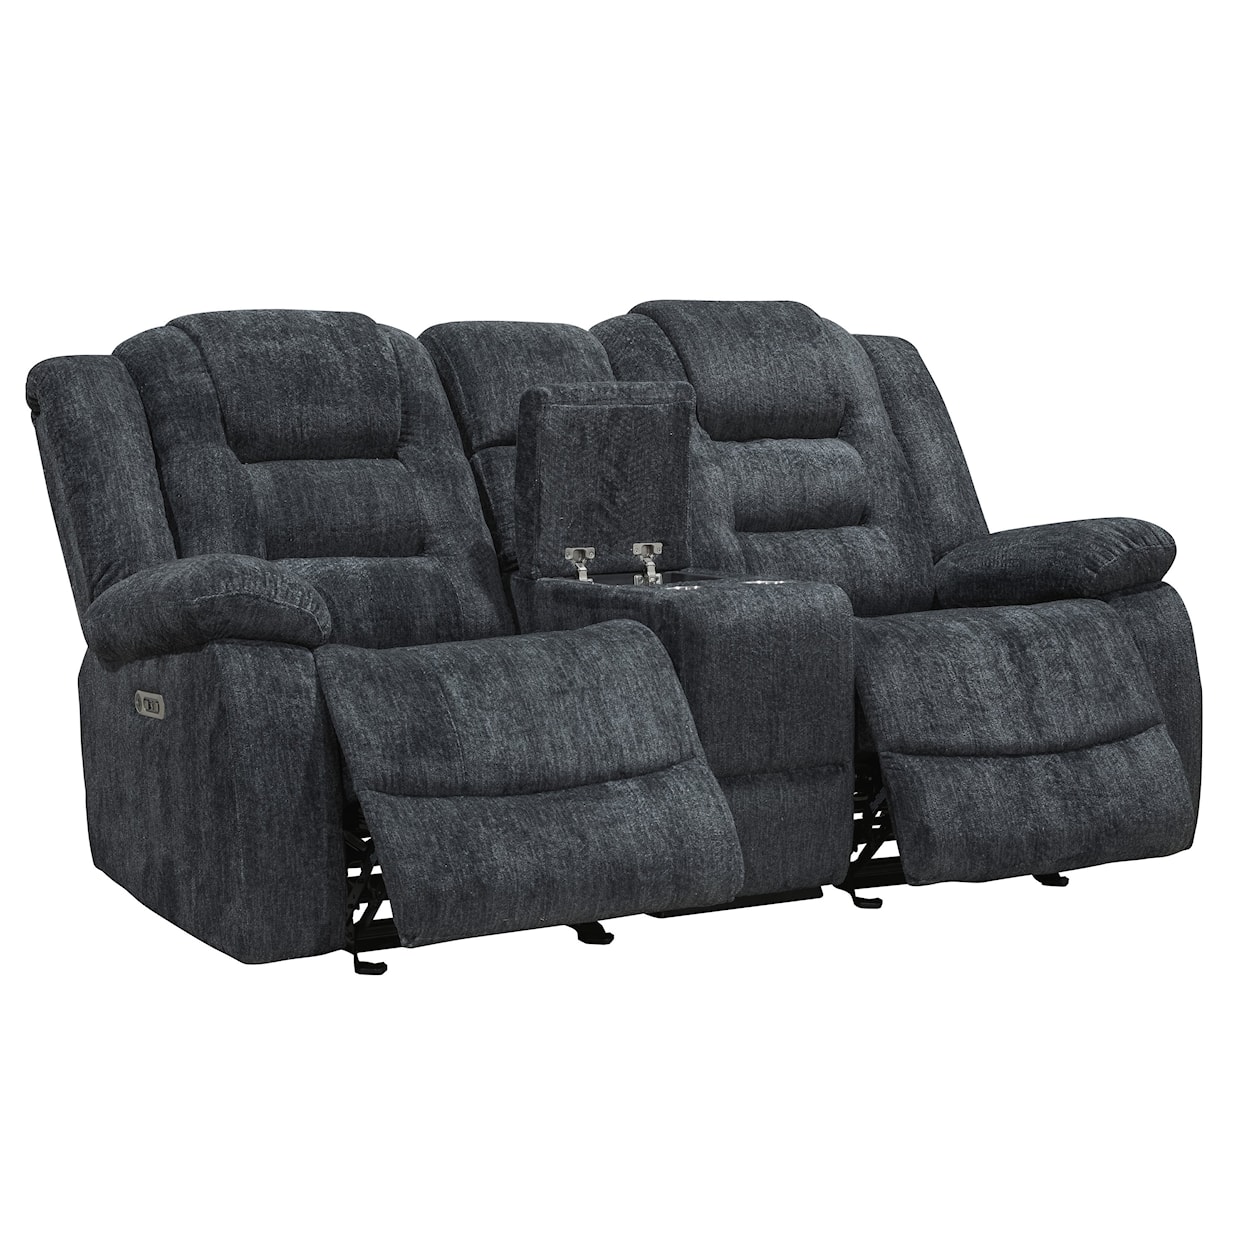 Paramount Living Bolton Loveseat Manual Glider with console